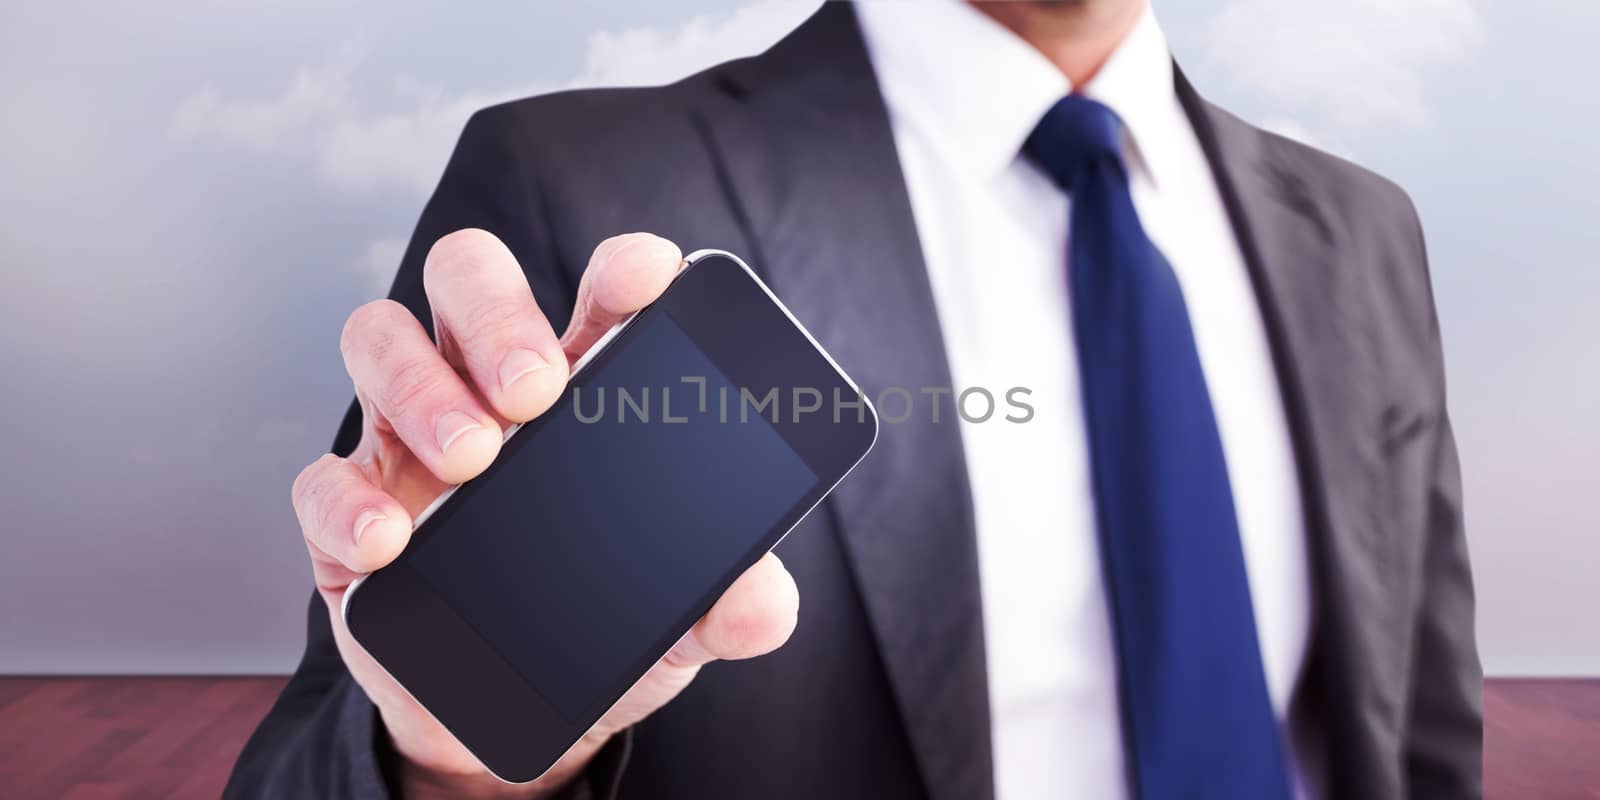 Businessman showing his smartphone screen against clouds in a room